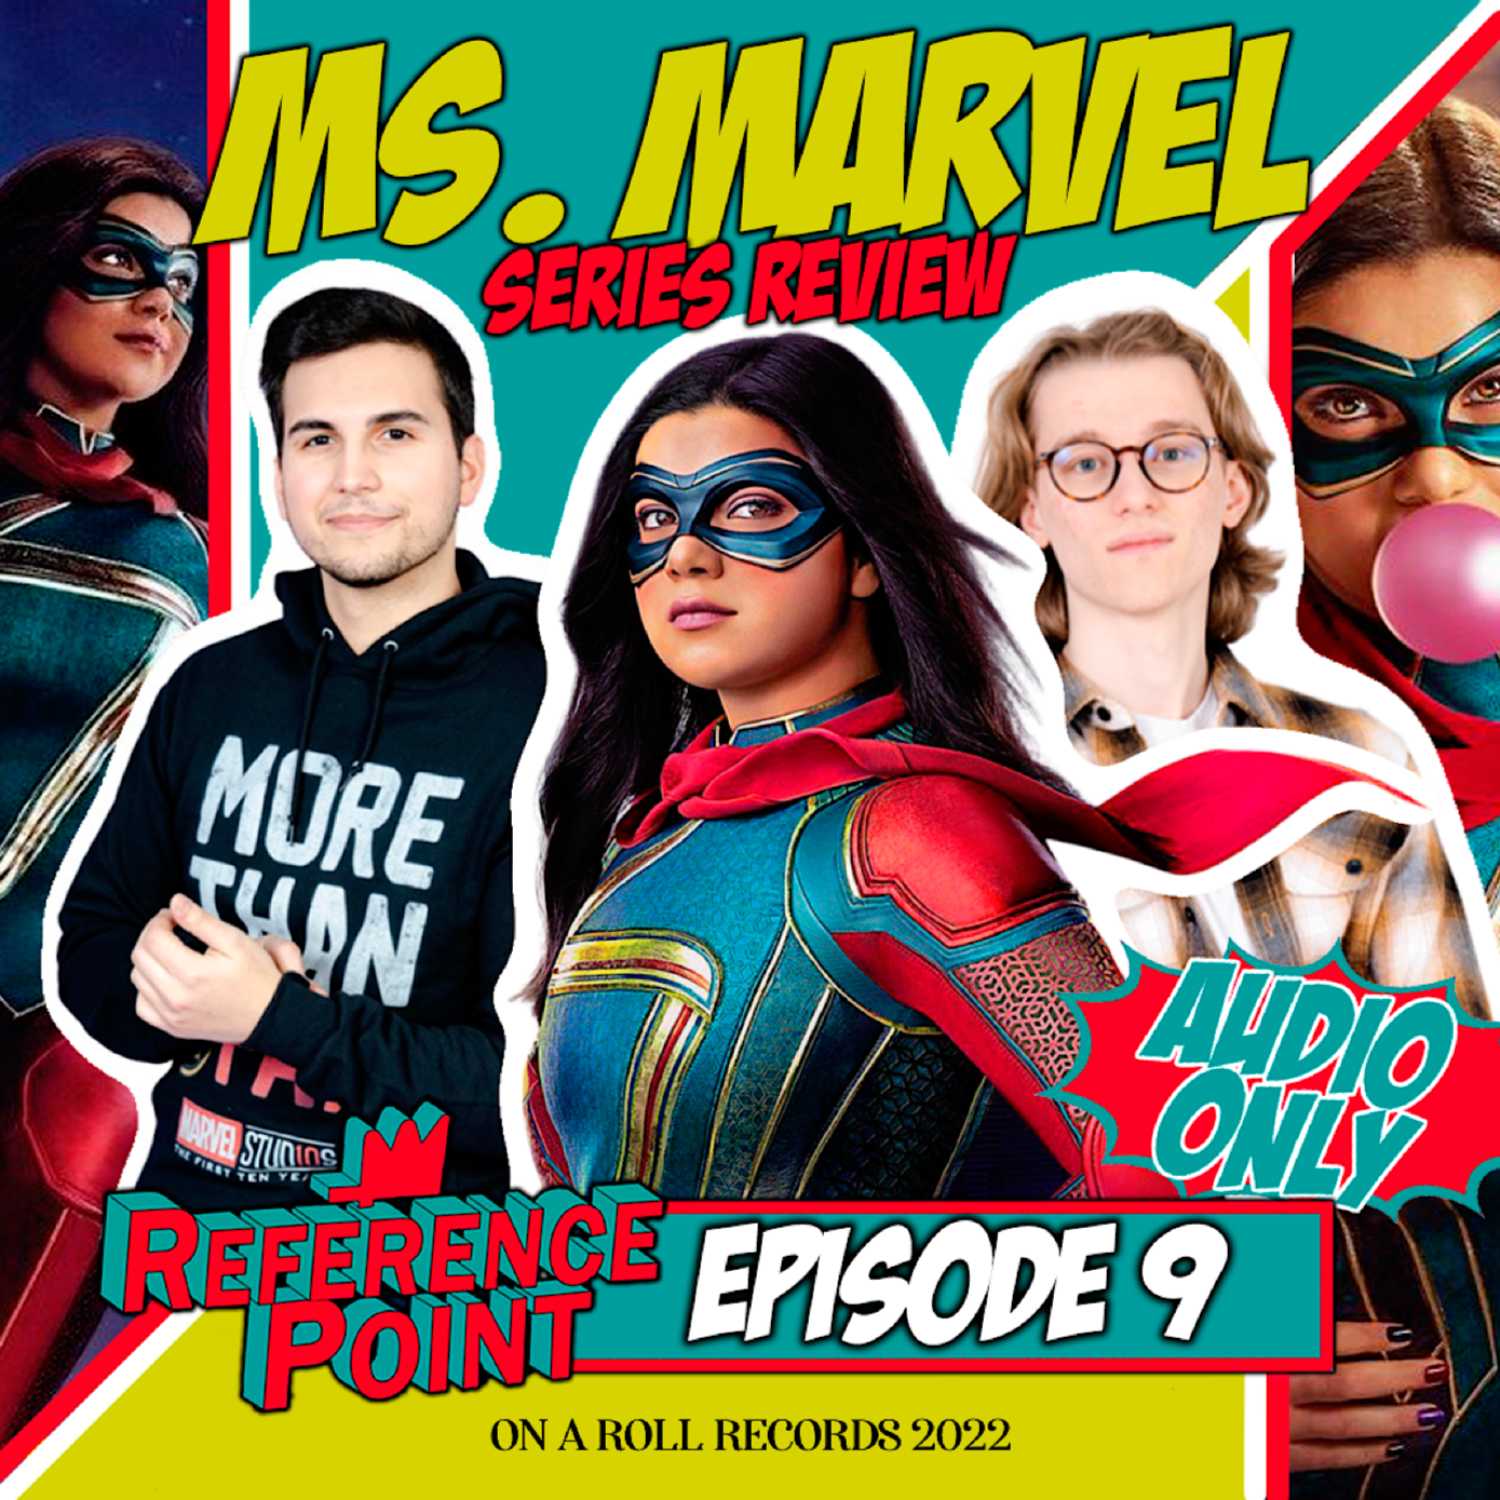 REFERENCE POINT - Episode 9 - MS. MARVEL (Series Review)